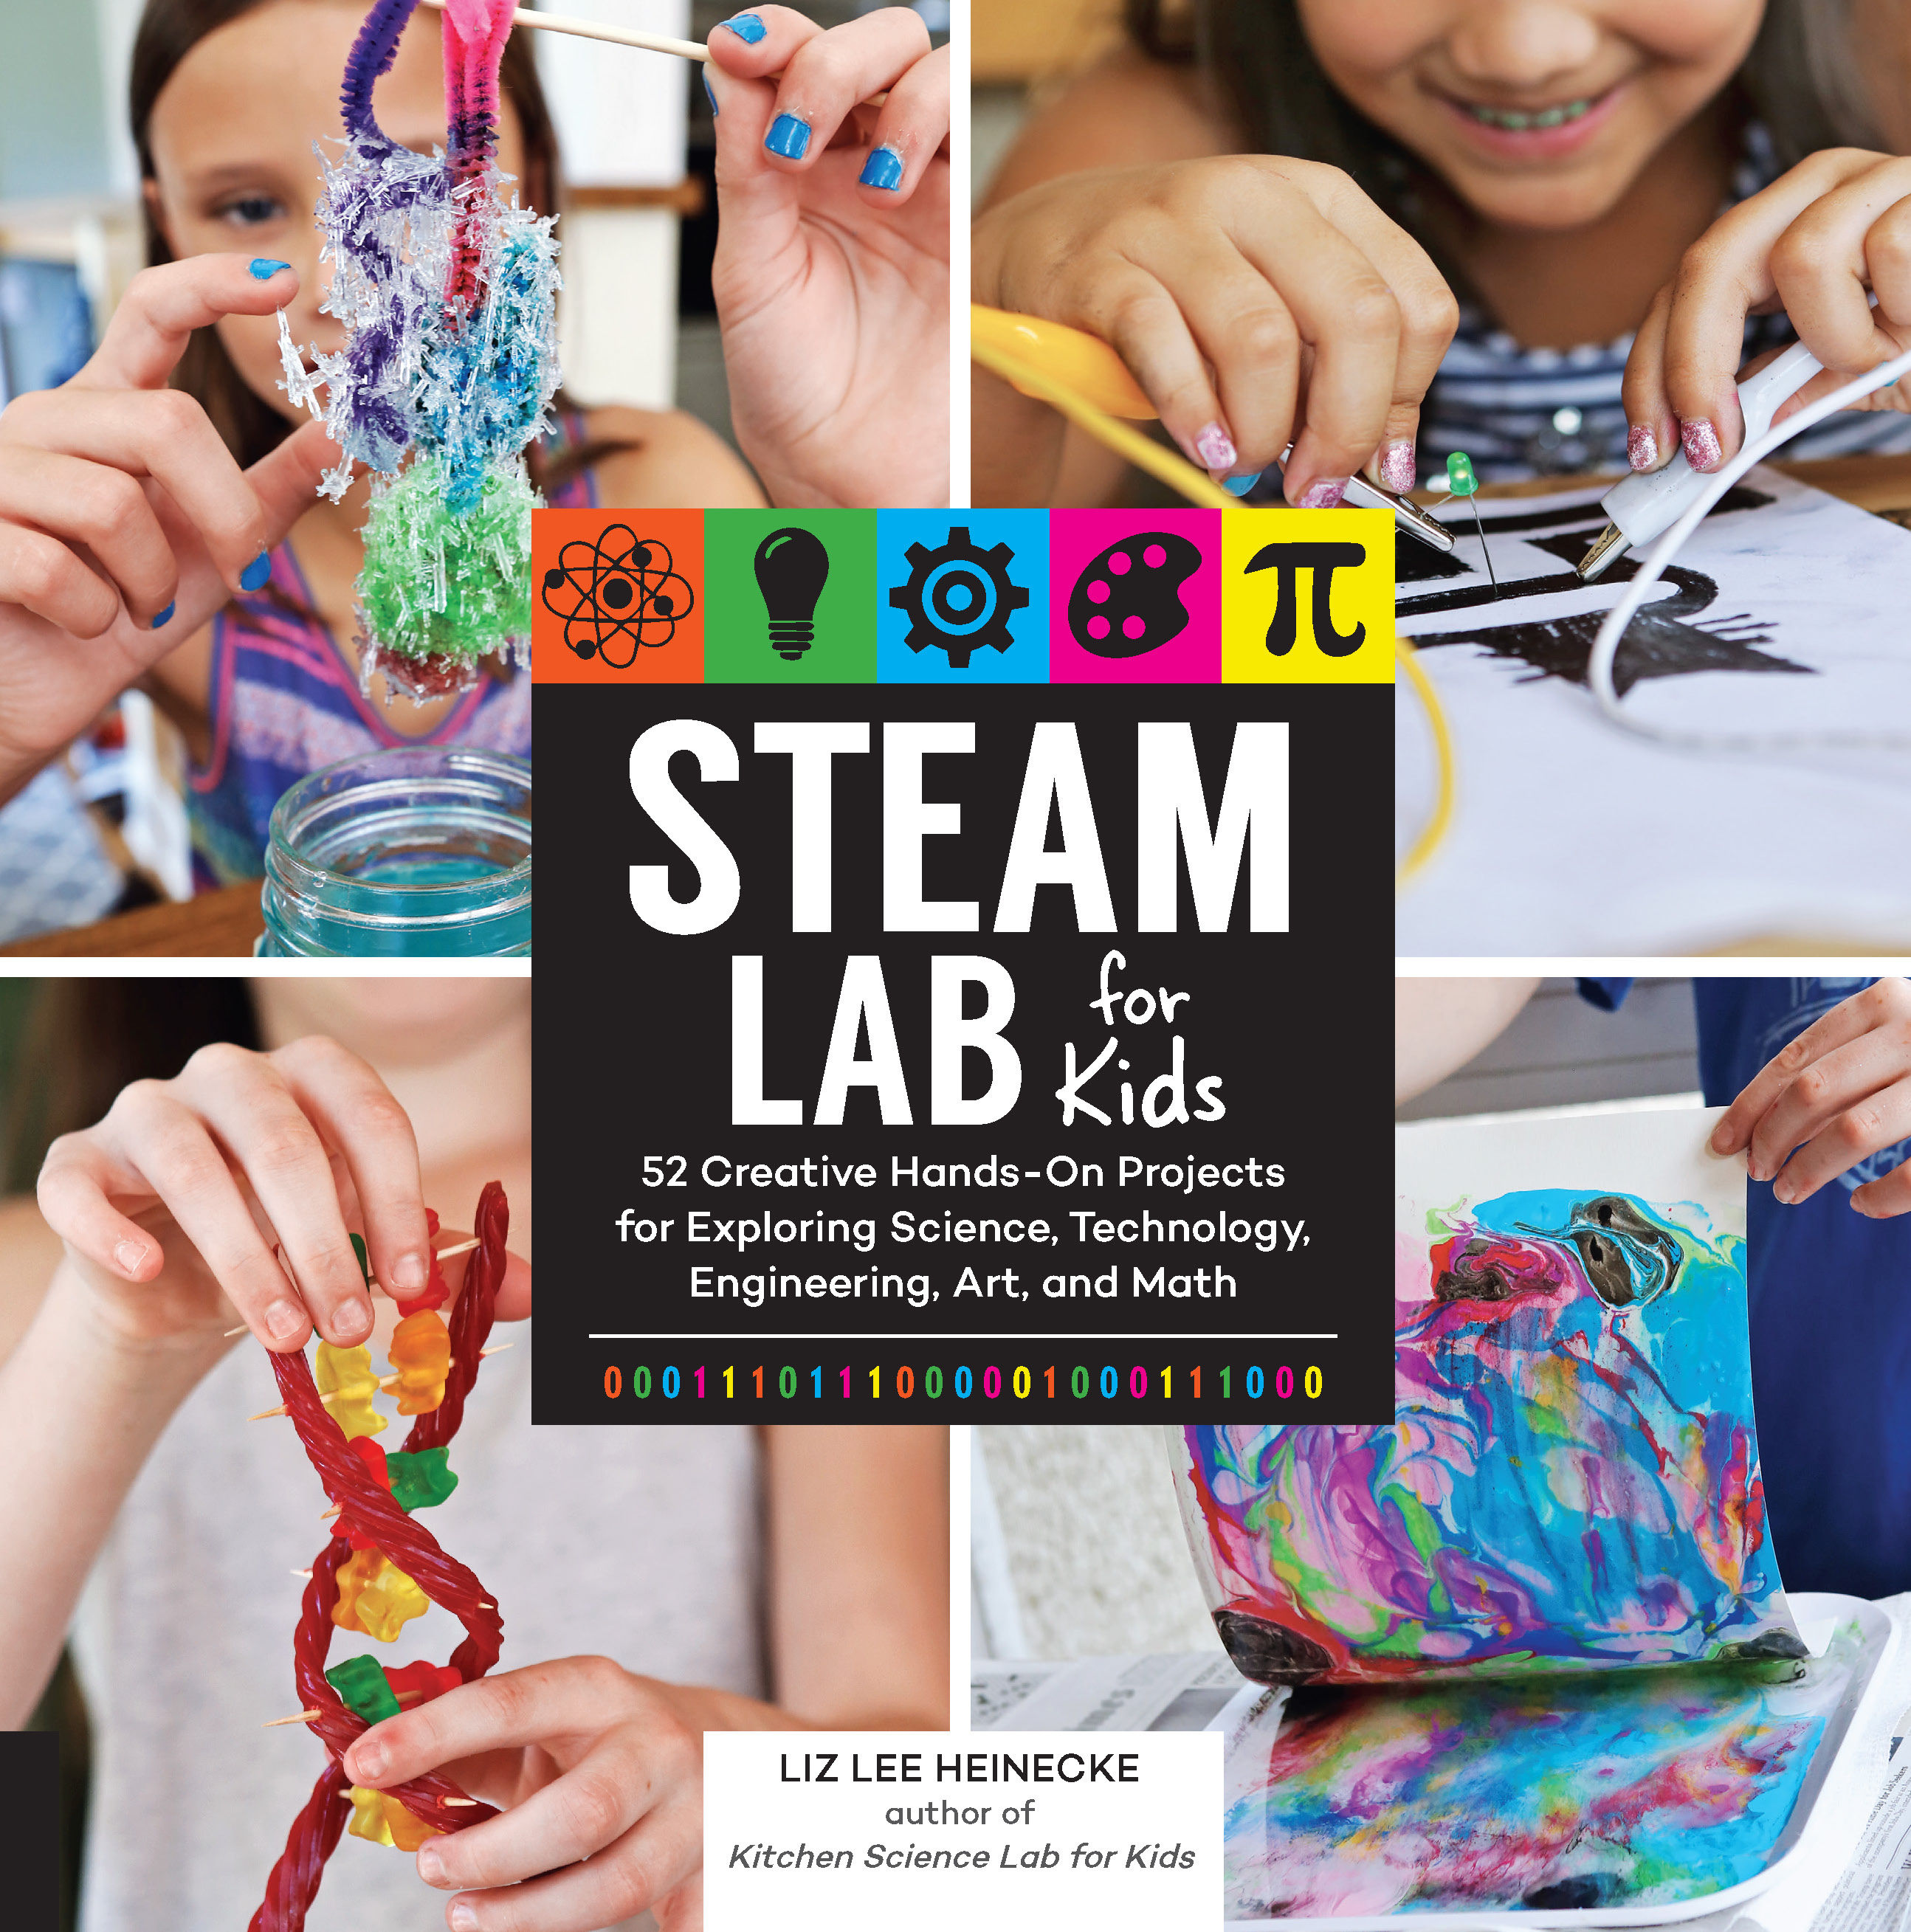 STEAM Lab for Kids 52 Creative Hands-On Projects for Exploring Science, Technology, Engineering, Art, and Math by Liz Lee Heinecke